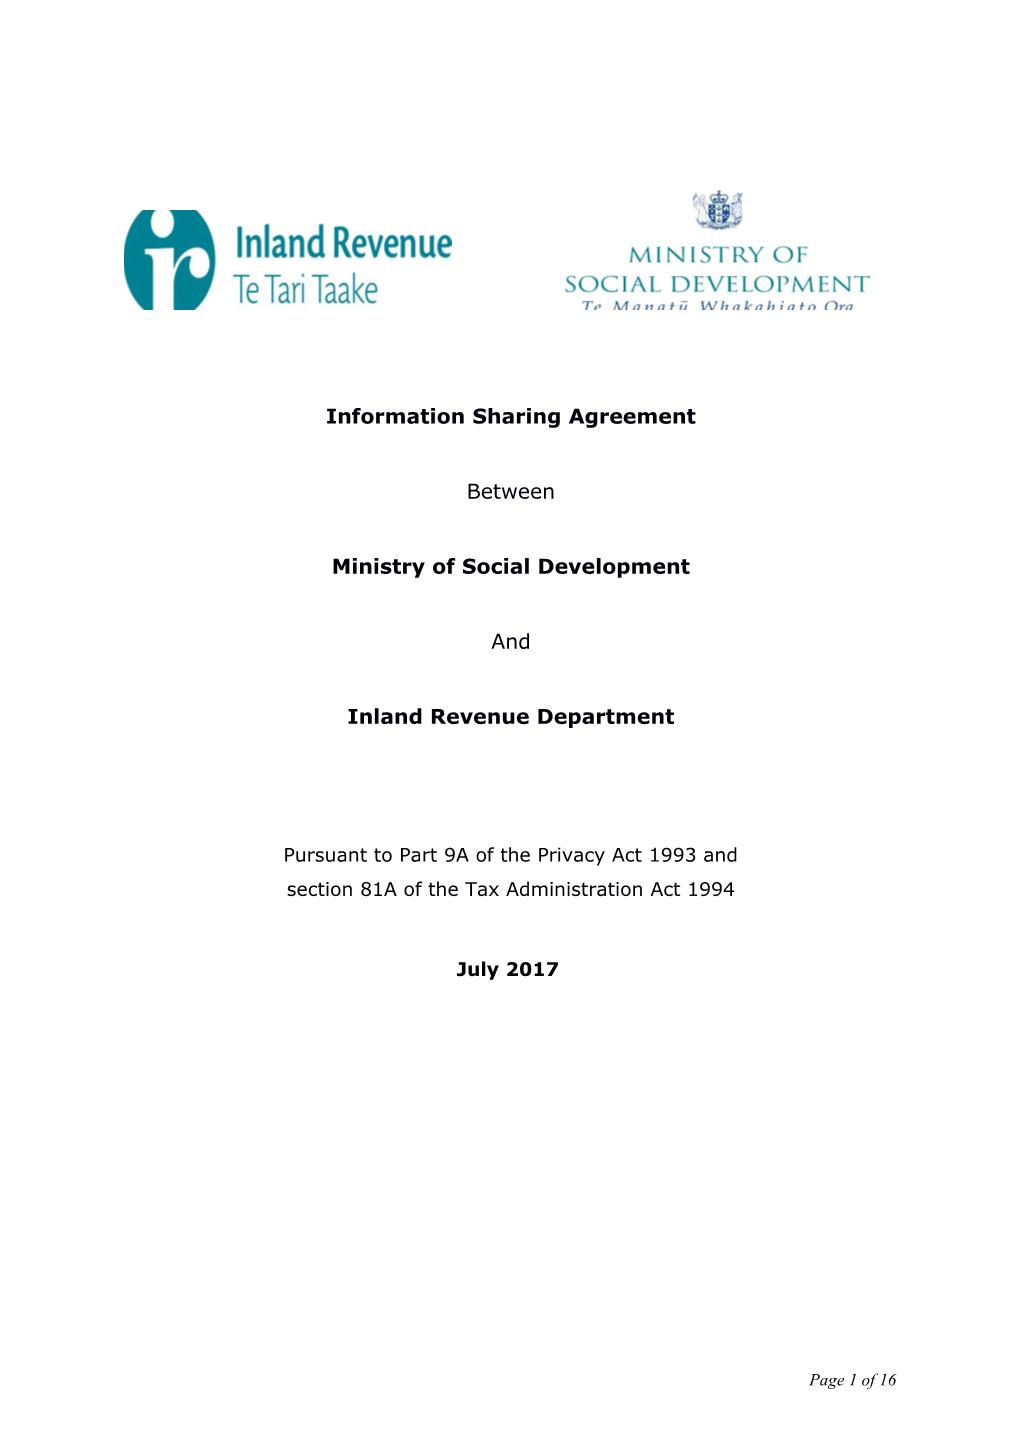 Information Sharing Agreement Between Ministry of Social Development and Inland Revenue